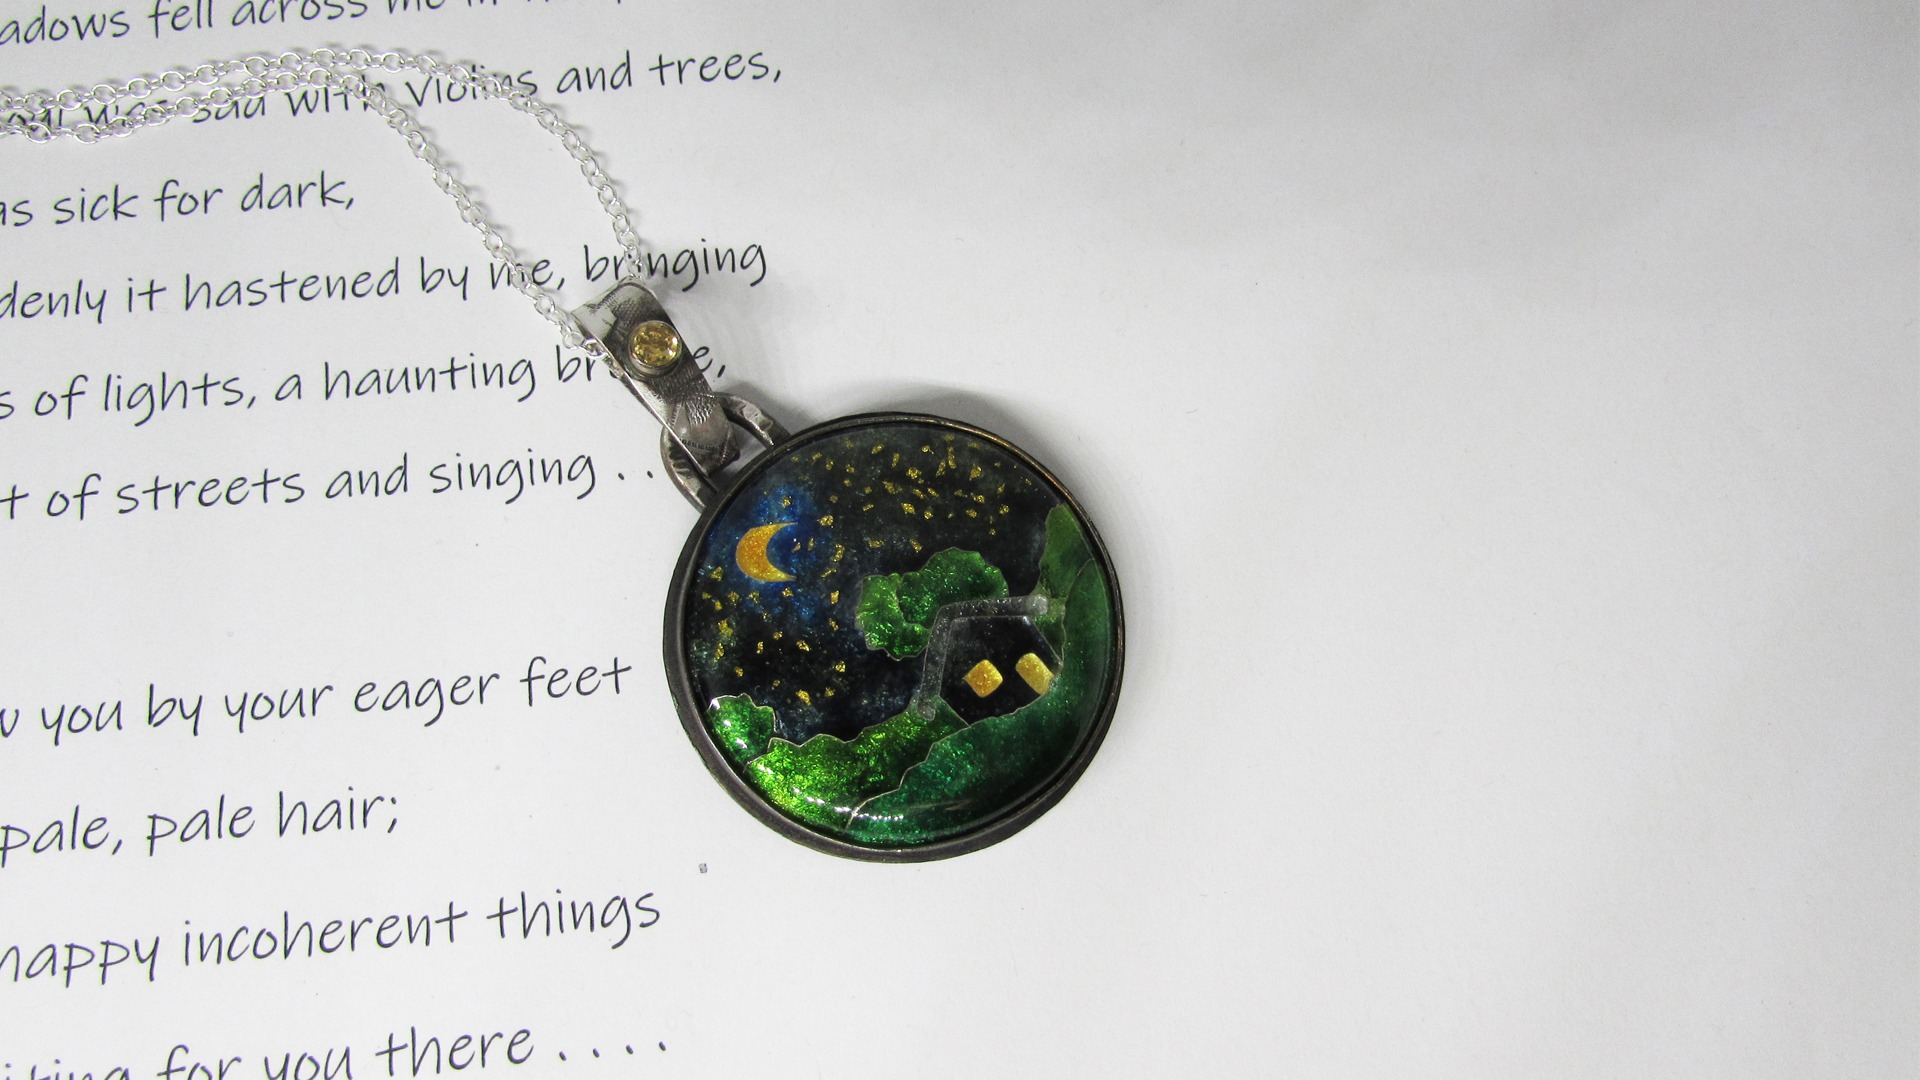 Starry night enamel pendant is made from silver, vitreous enamel and using a technique called cloisonné